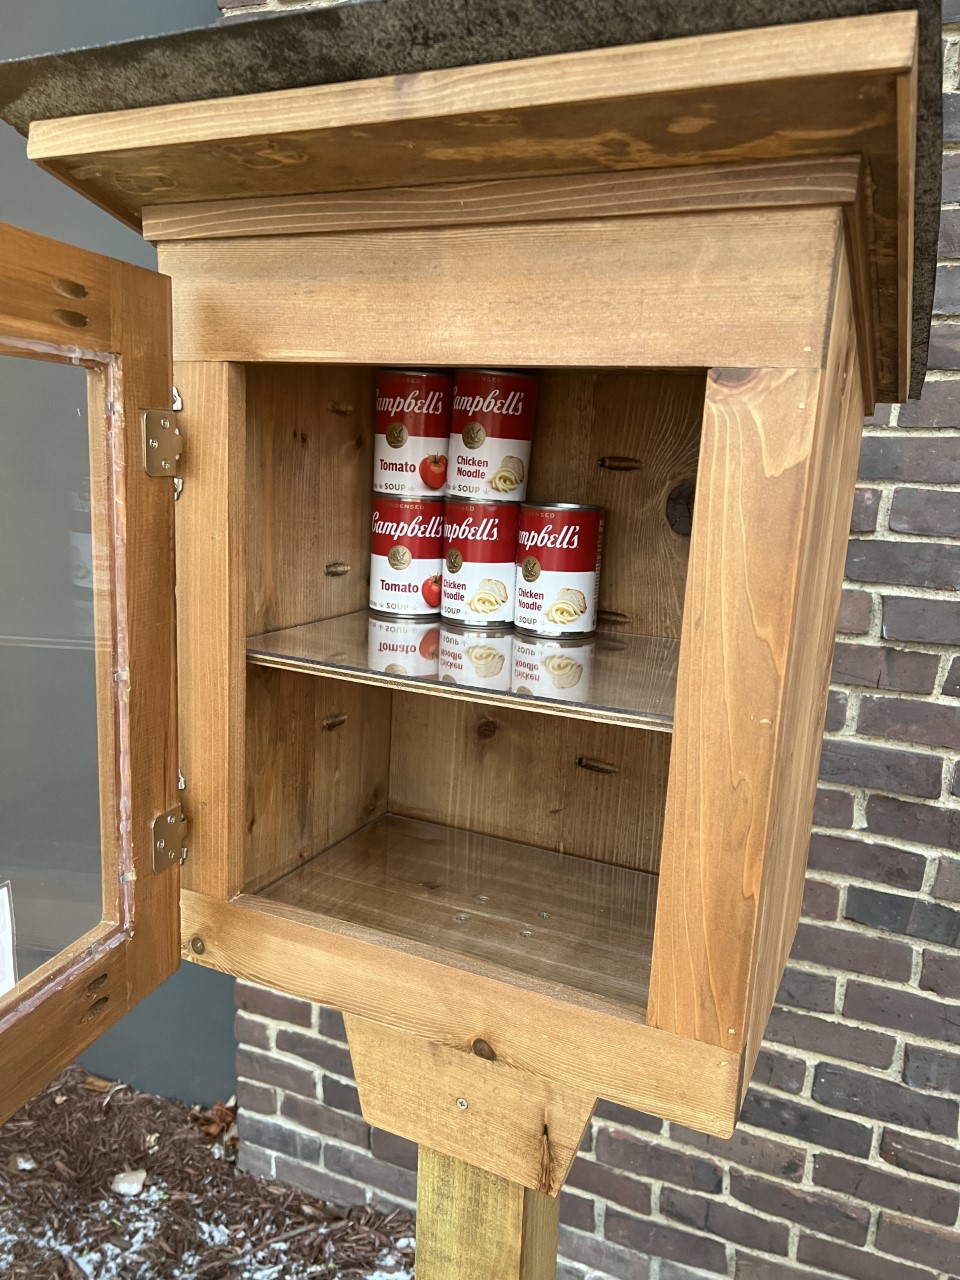 Castle Shannon Library Little Free Pantry Photo 2